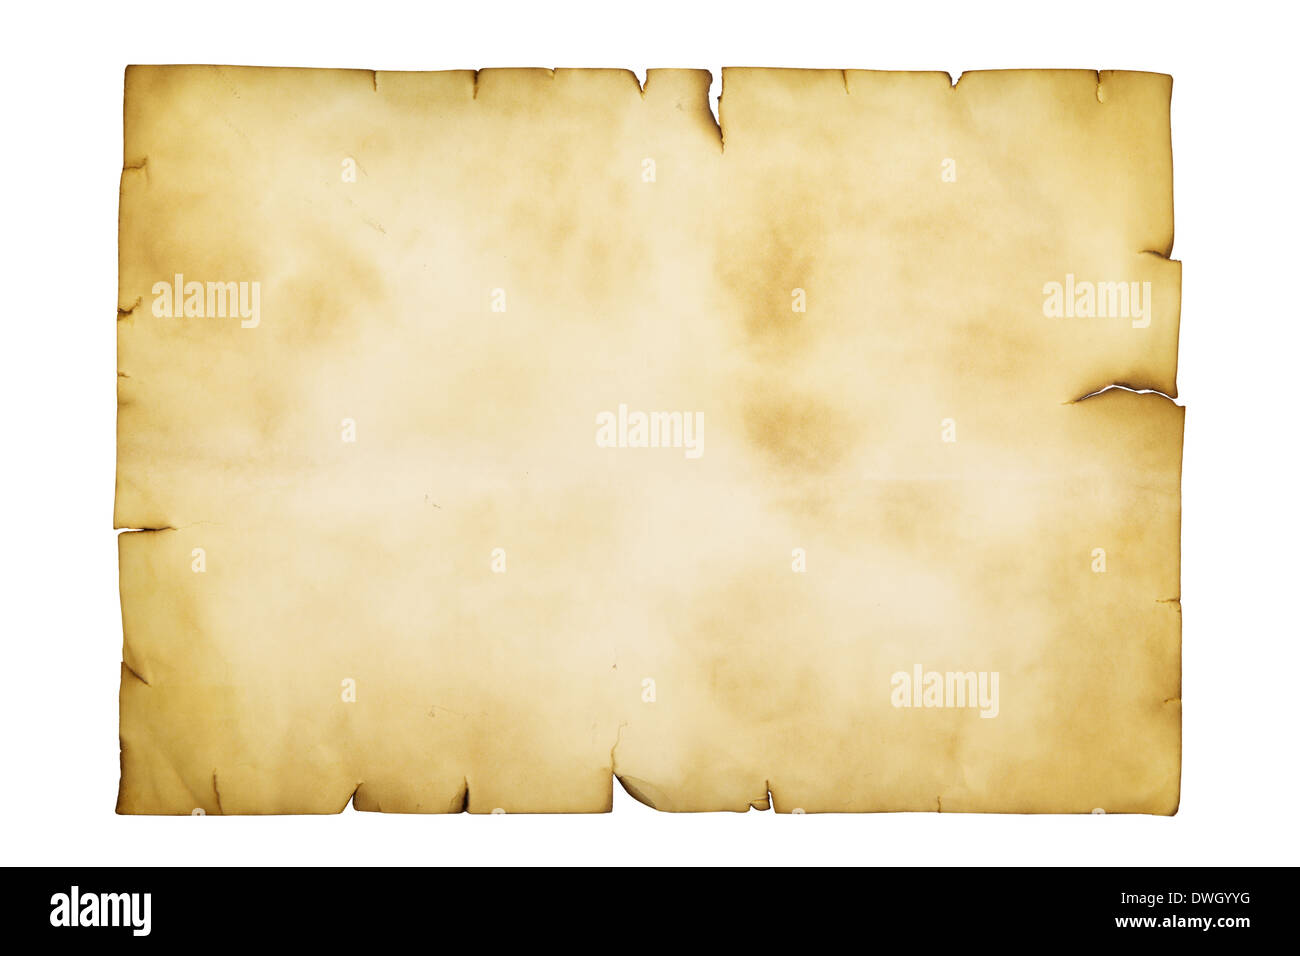 Ancient manuscript isolated over a white background Stock Photo